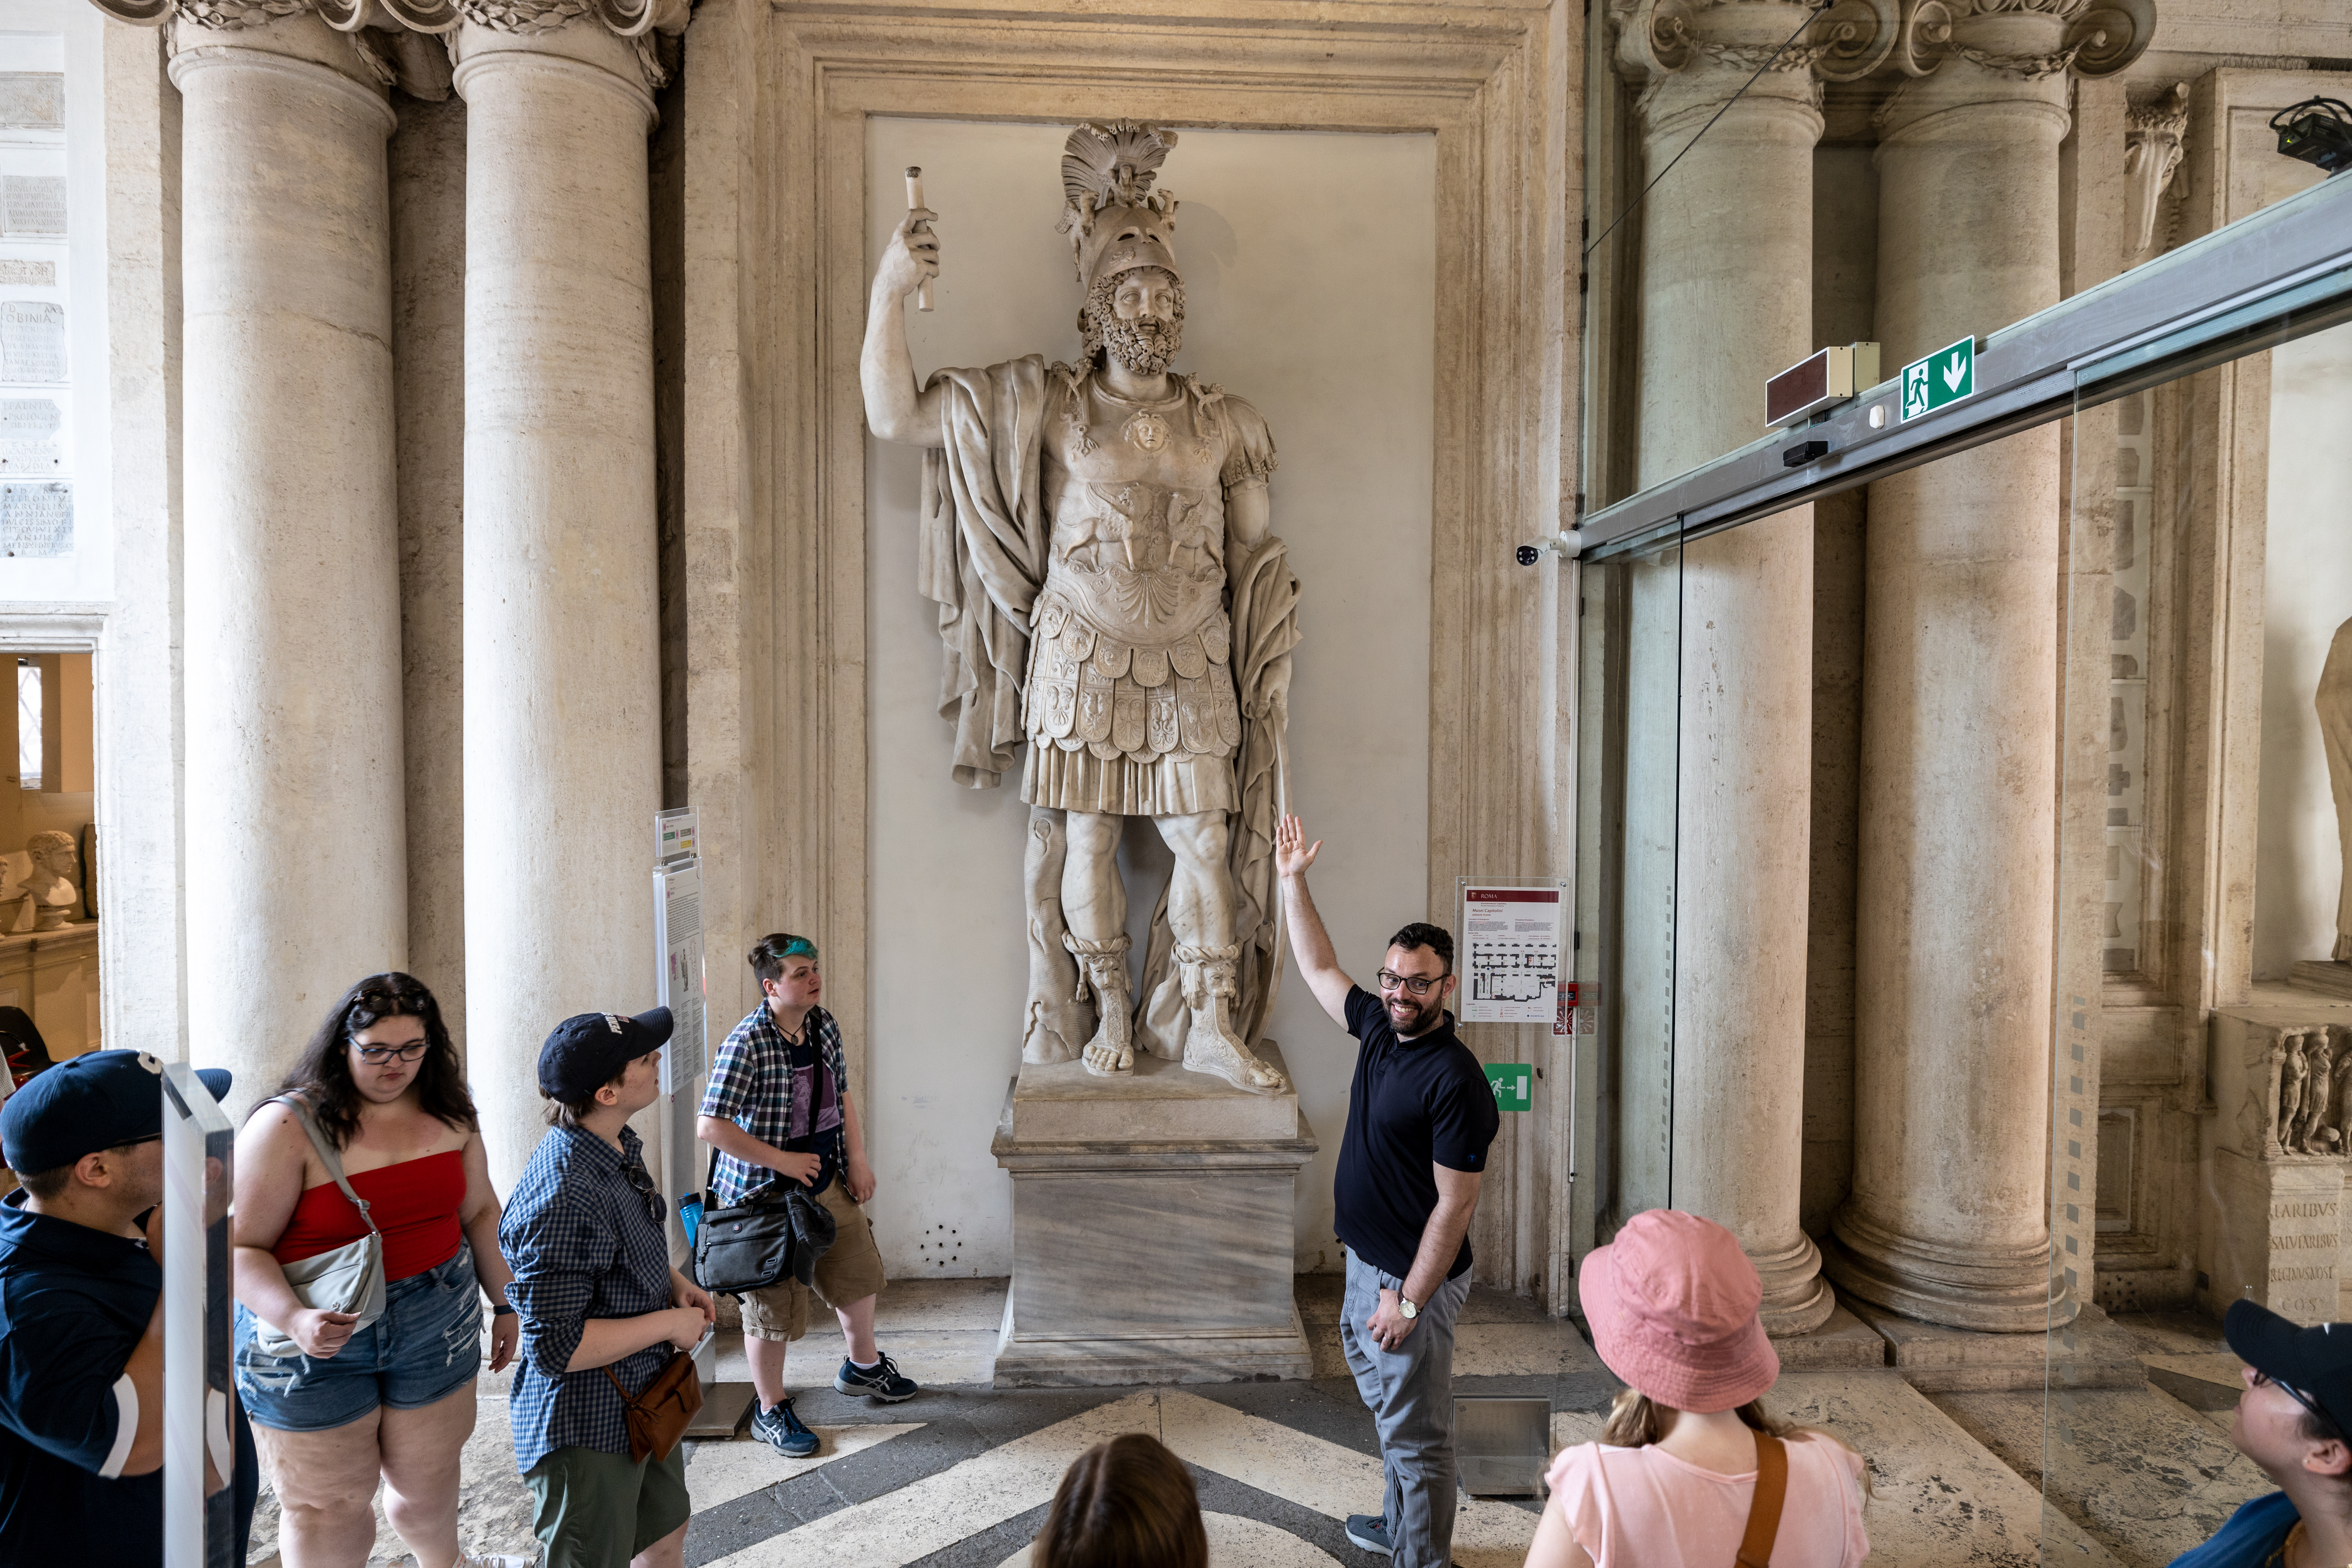 Mathias Hanses, associate professor of classics and ancient Mediterranean studies, gives a tour of the Capitoline Museums in Rome.